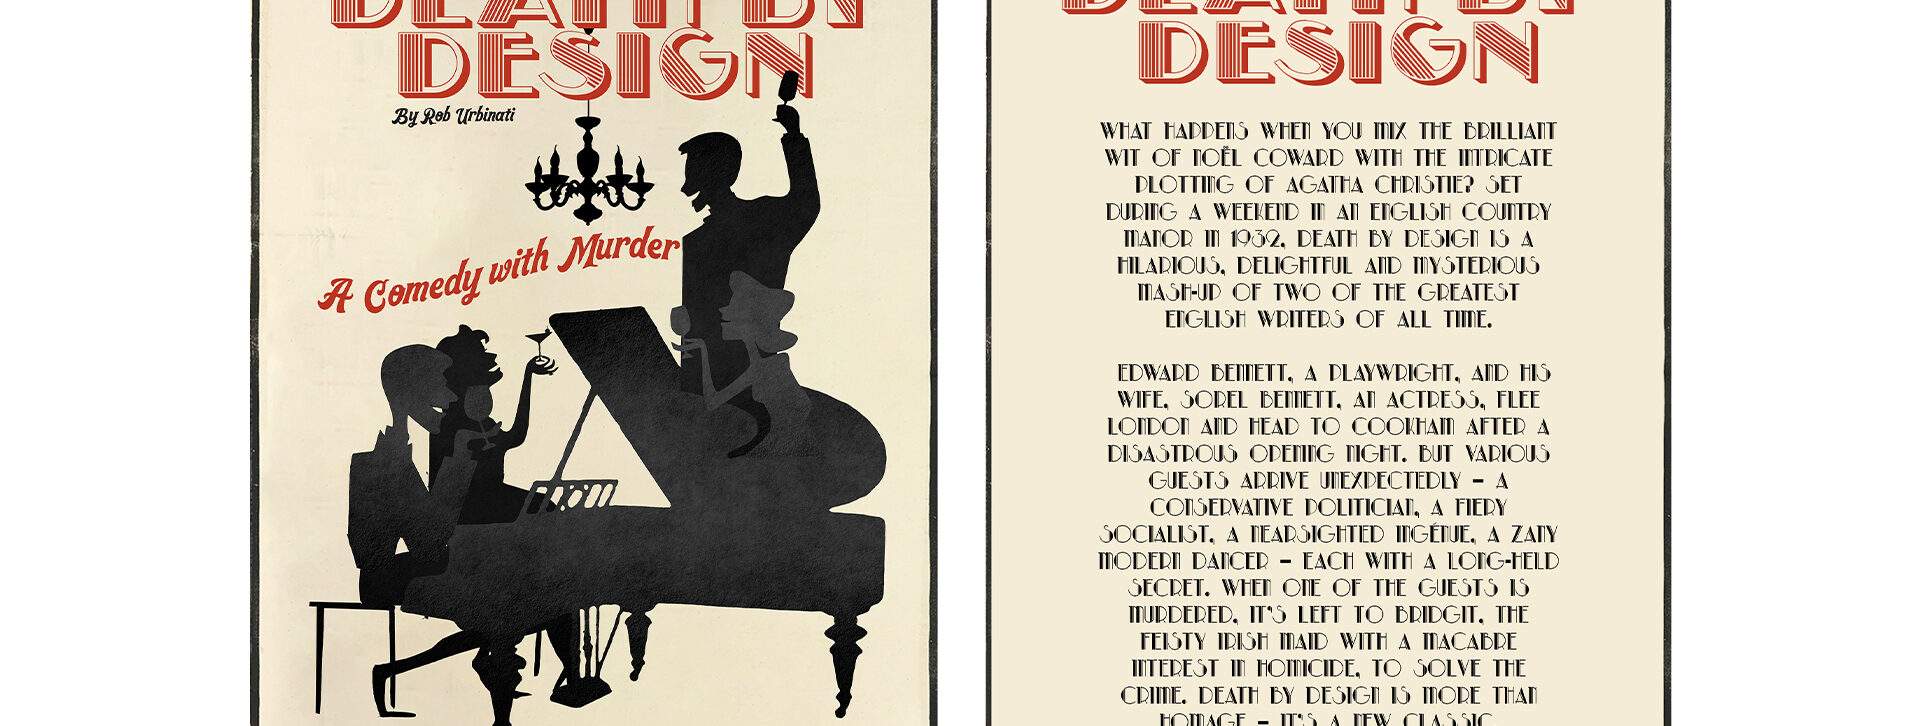 Westwood Musical Society Peterborough Presents: Death by Design